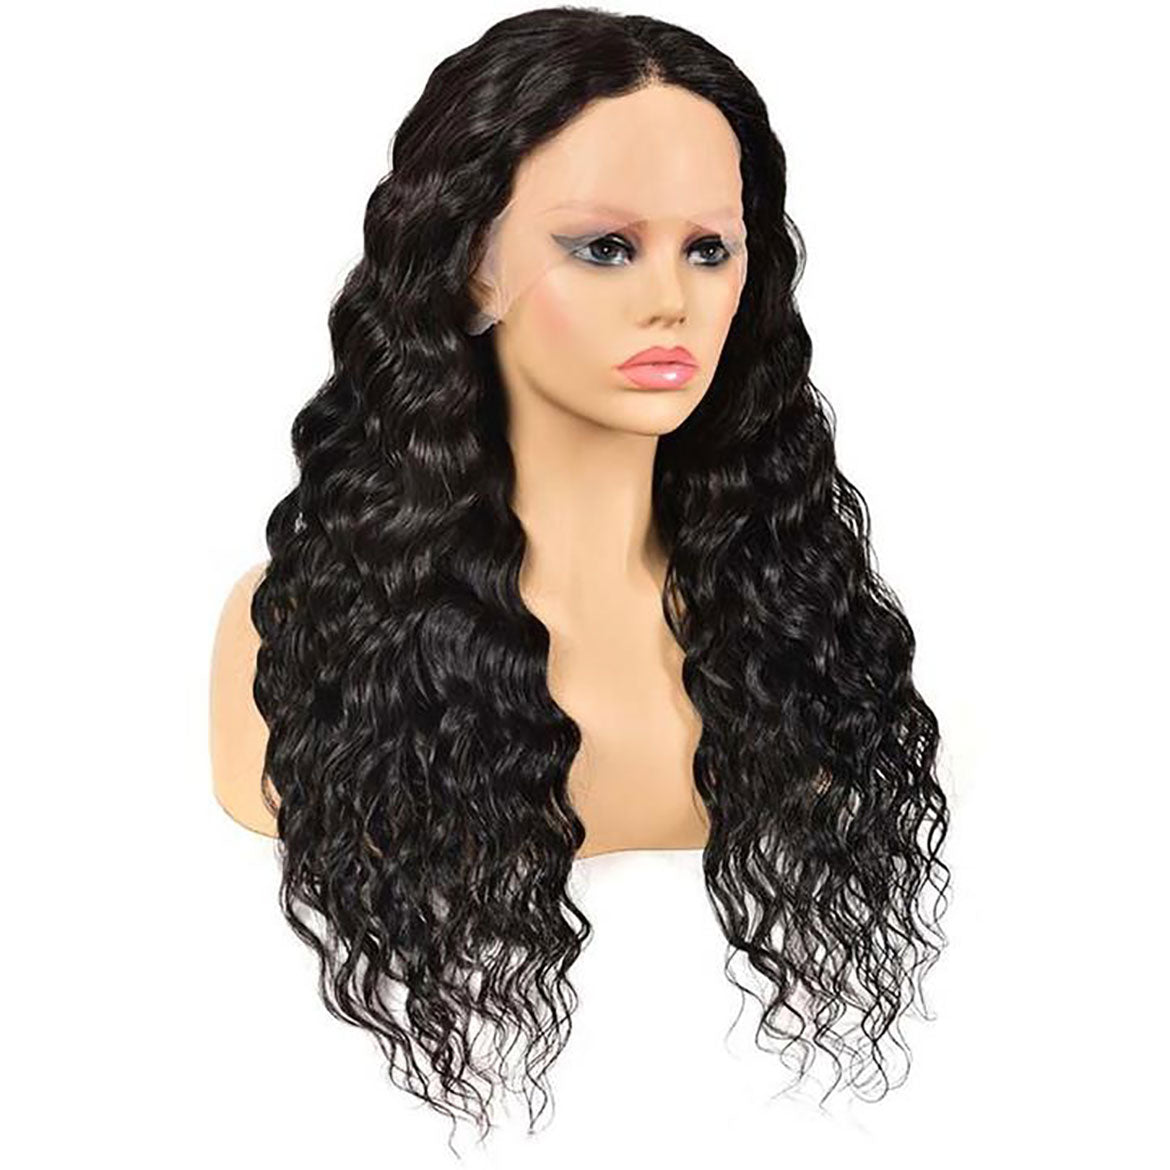 Skin Melted 13x6 Lace Front Wigs